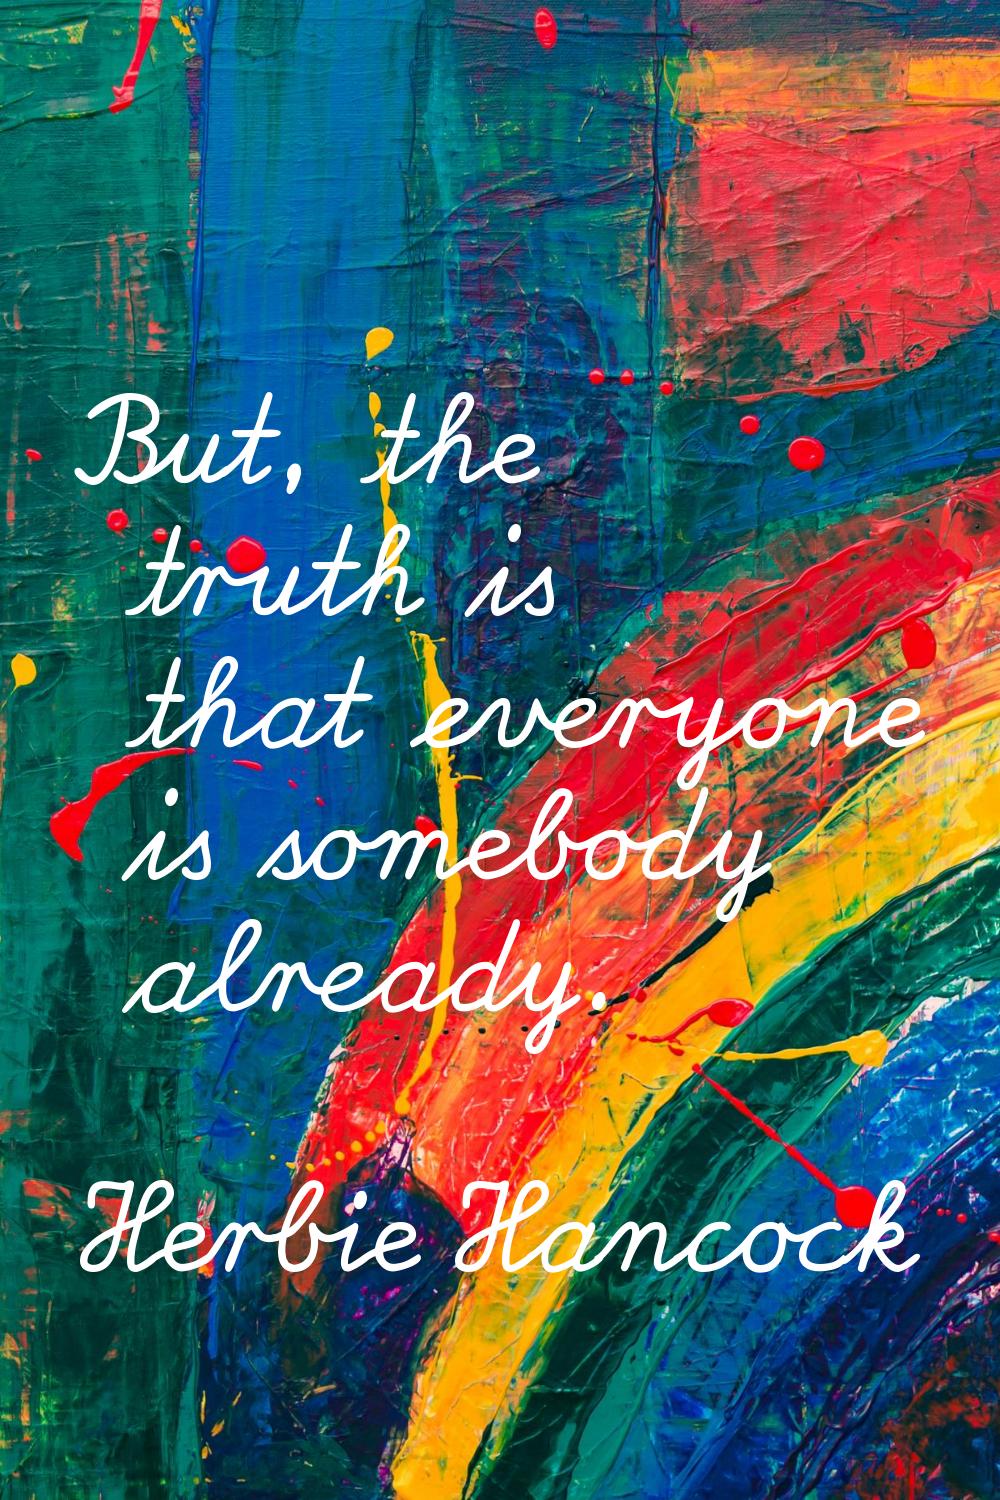 But, the truth is that everyone is somebody already.